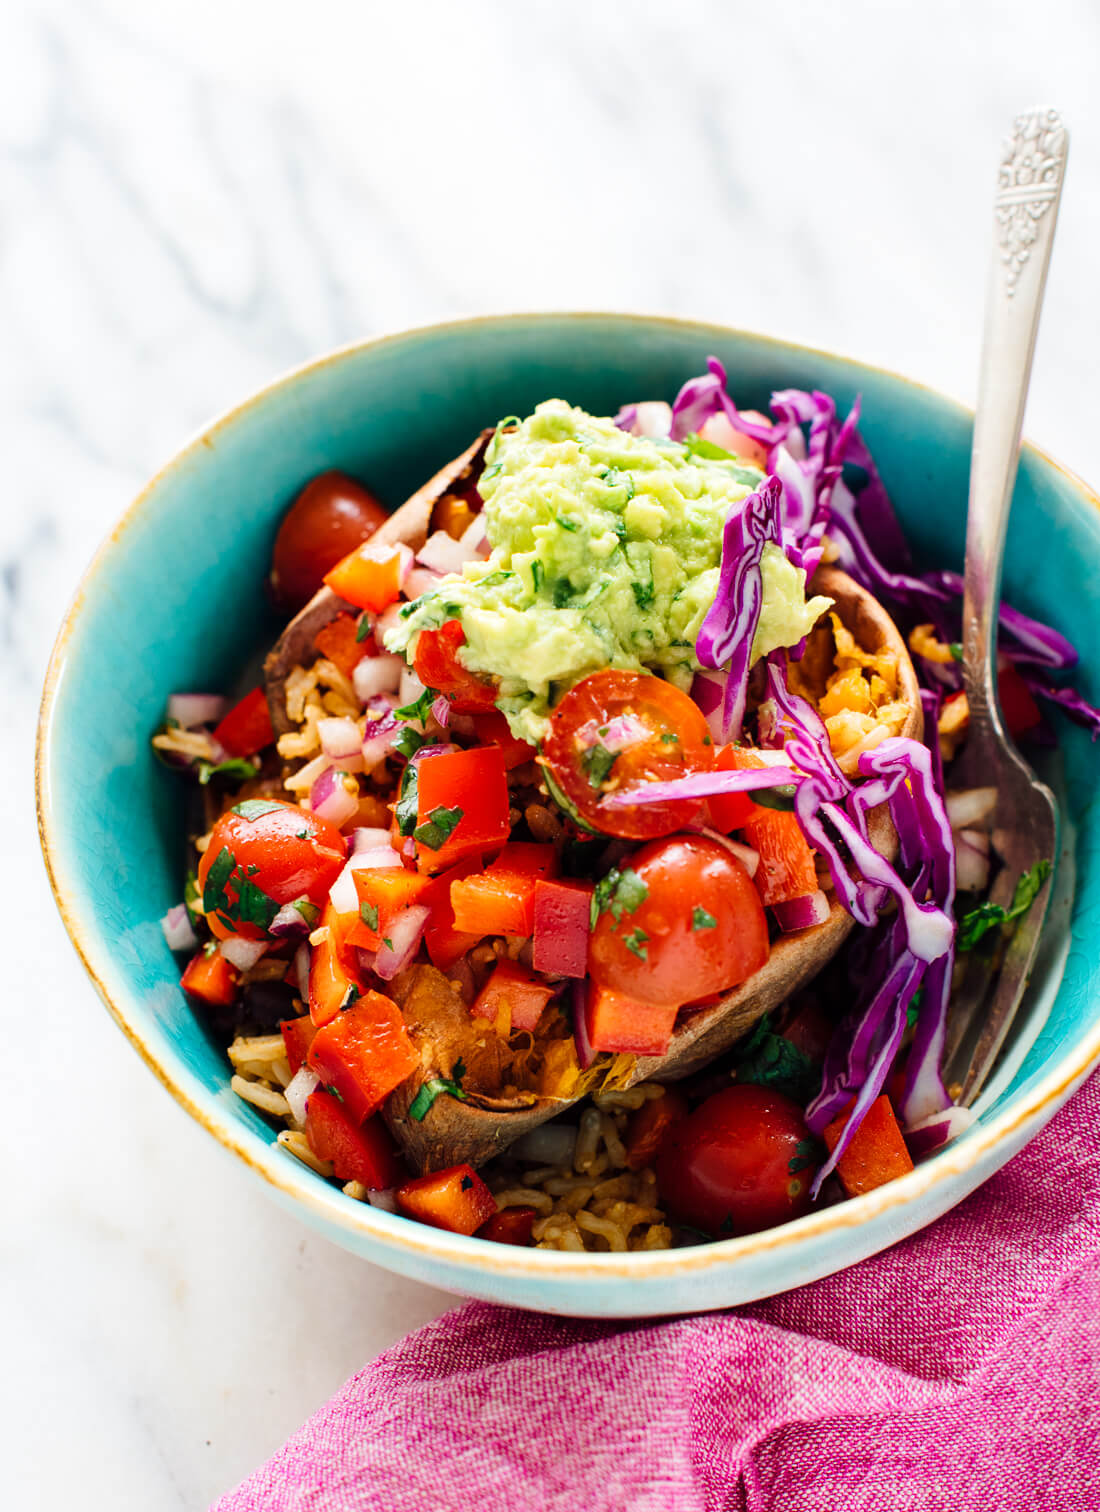 Fresh and hearty sweet potato burrito bowls recipe - recipe from The First Mess Cookbook